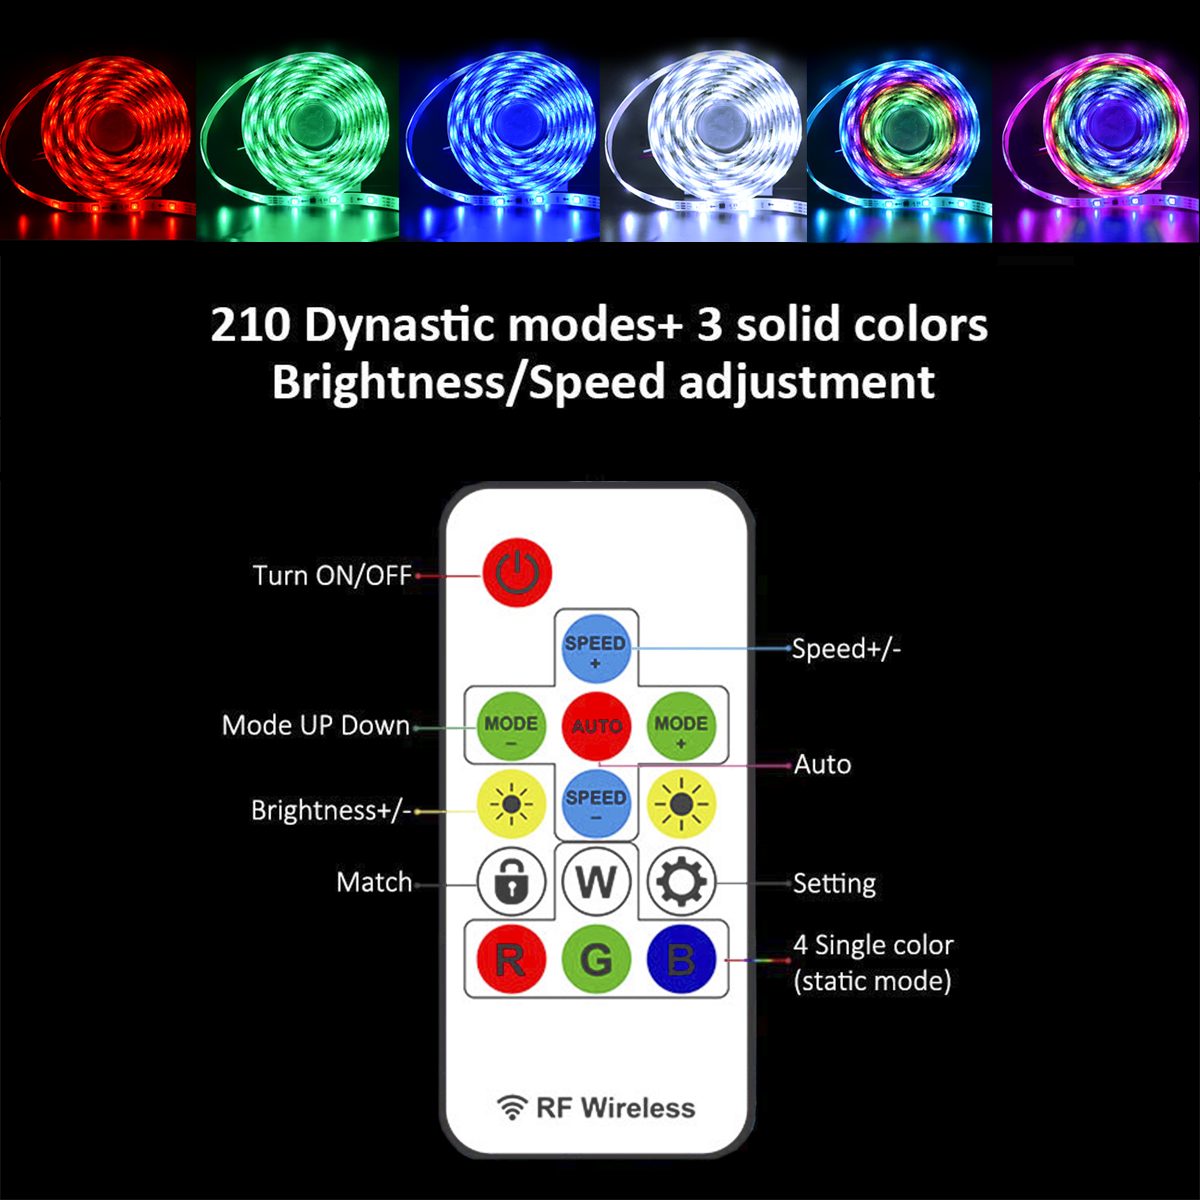 DC5-24V LED DMX Bluetooth Symphony SPI Grouping Synchronize Controller for WS2811,WS2812B, WS2813, WS2815, WS2818, SK6812, TM1812 Light Strip, Waterproof Optional